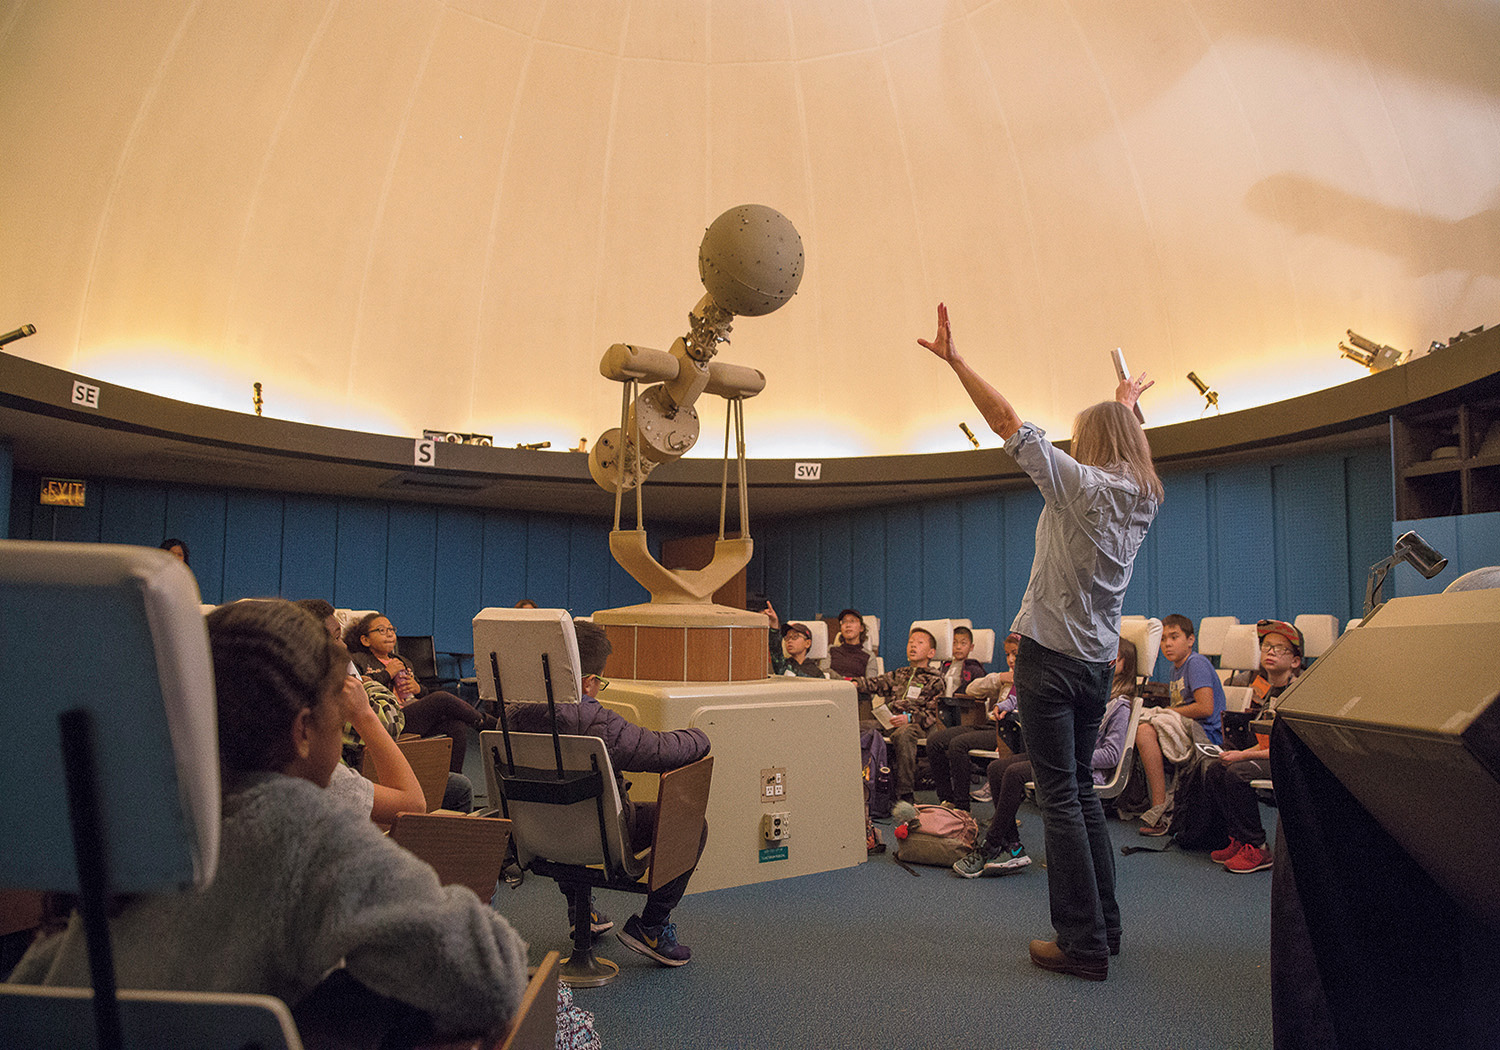 Professor Cool introduces young visitors to the planetarium (above) and the constellations.